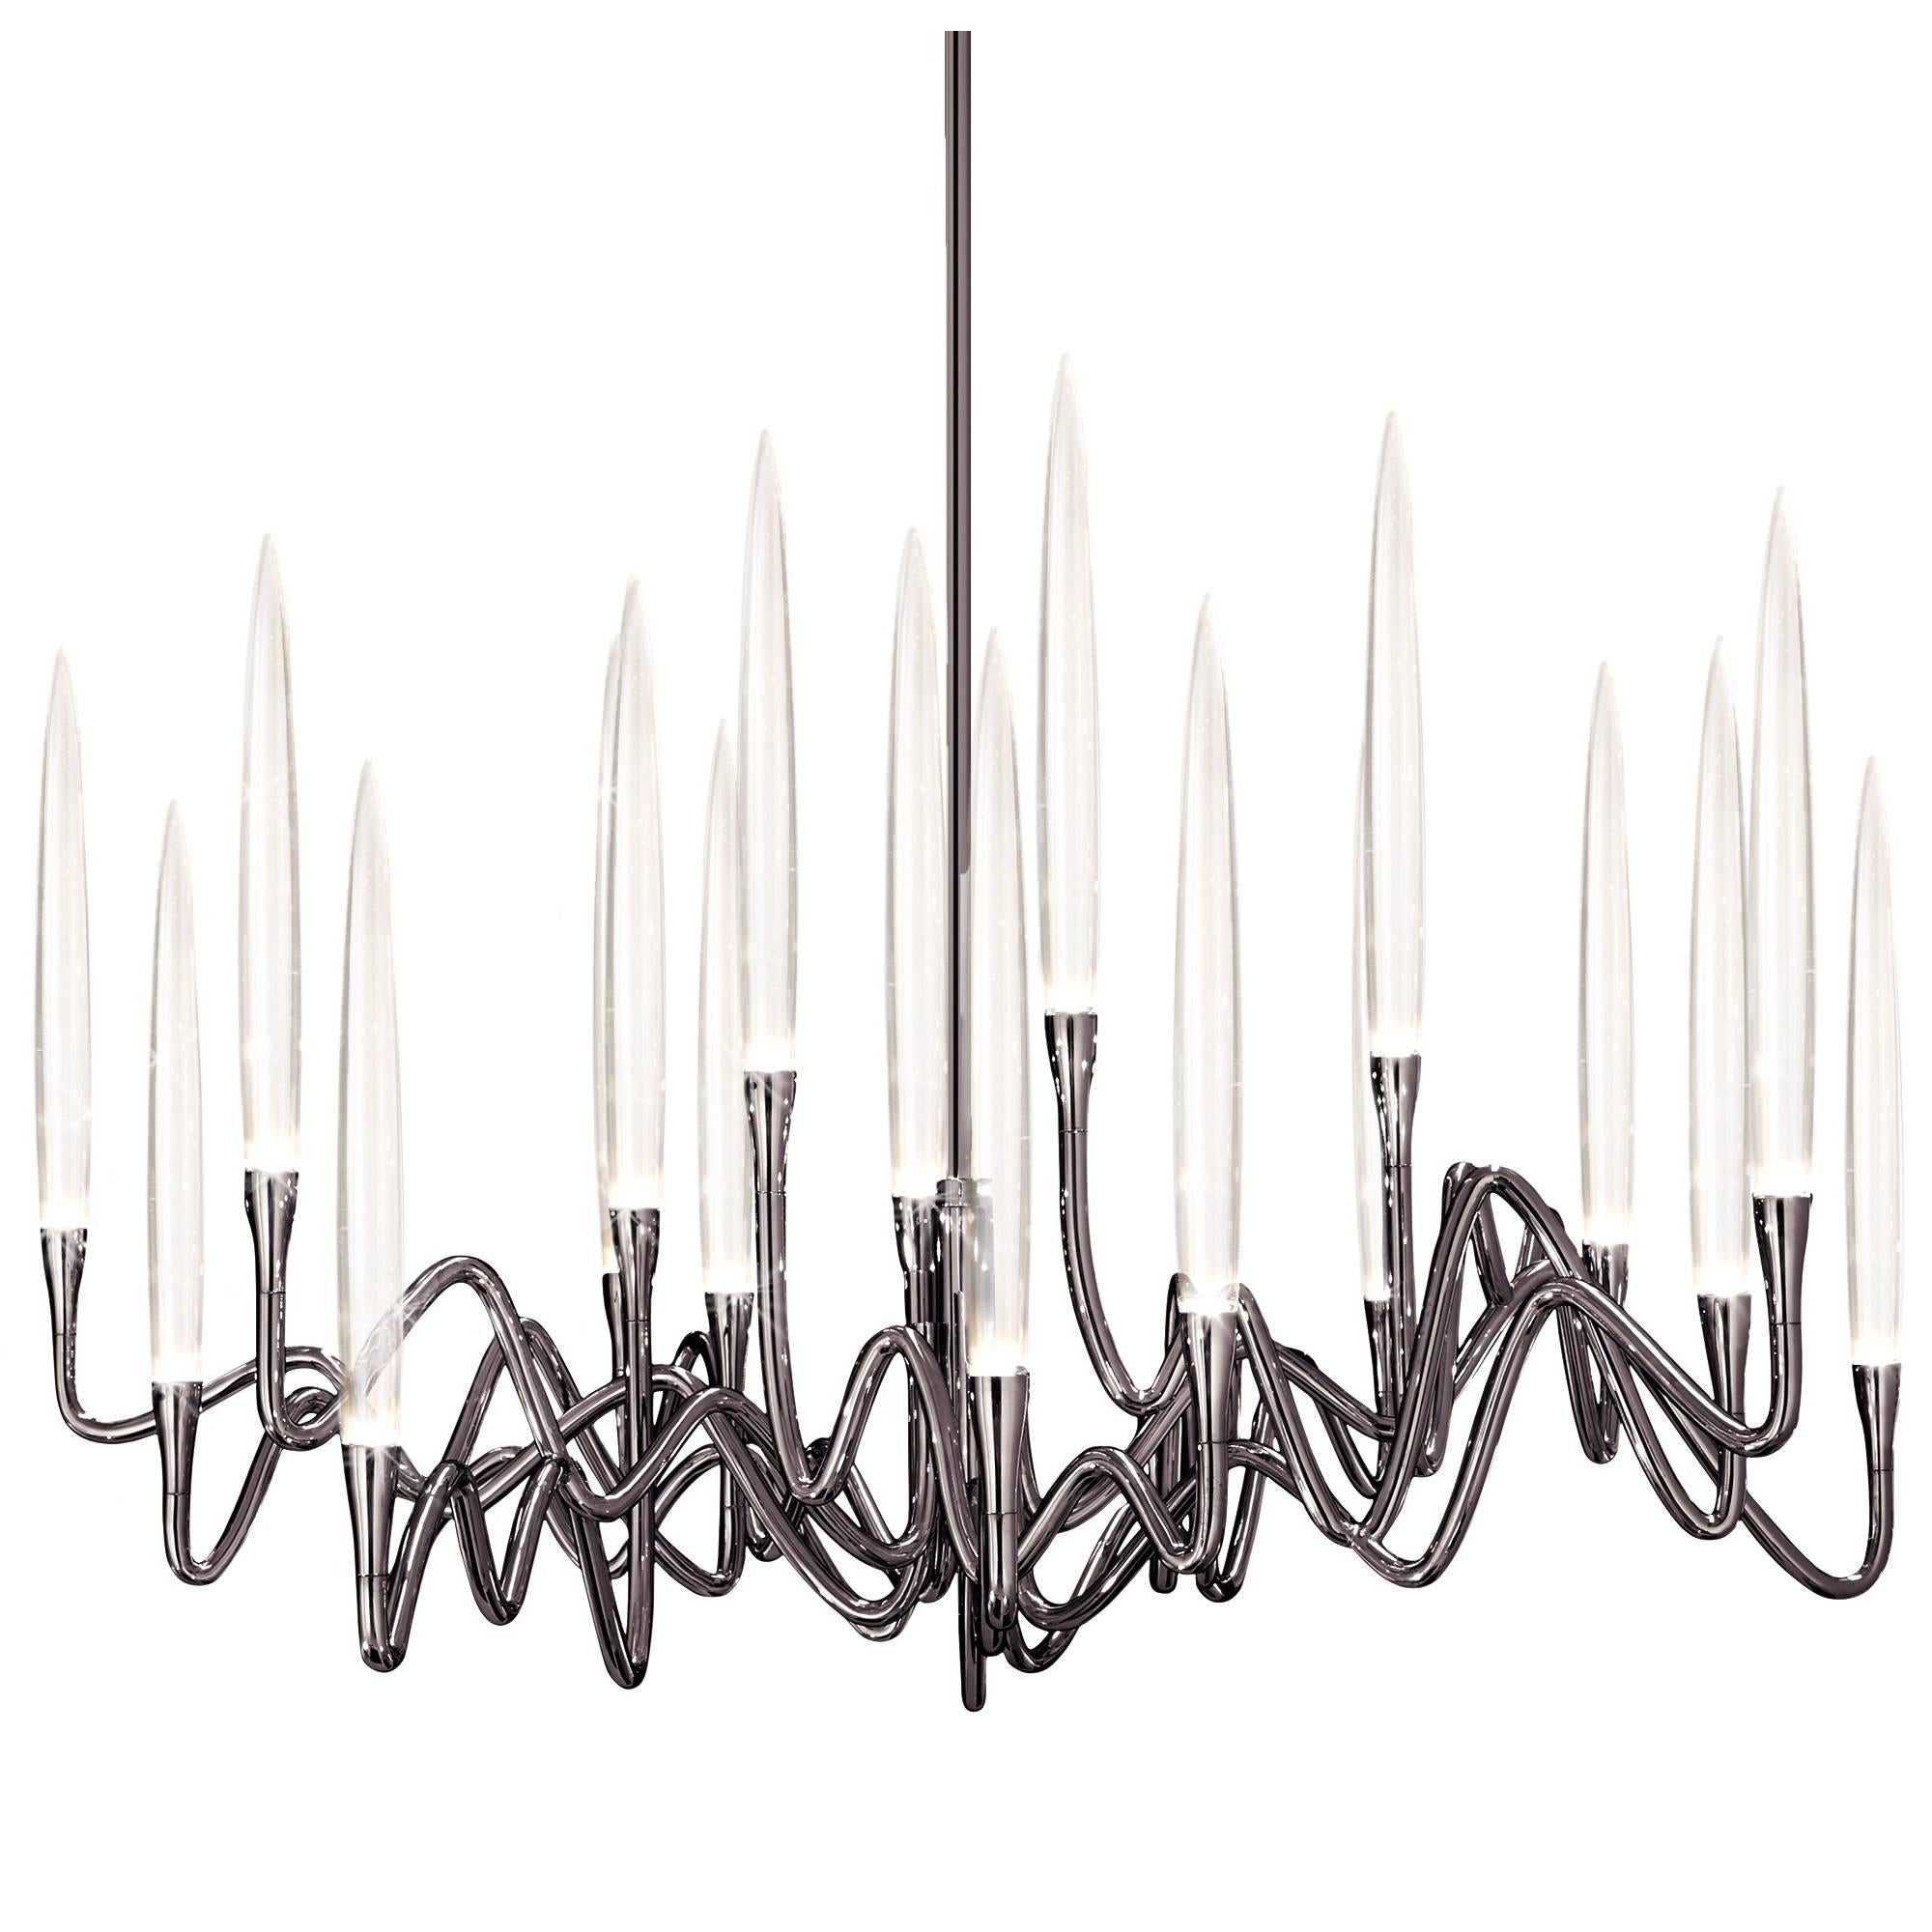 "Il Pezzo 3 Round Chandelier" LED lamp in black nickel finish brass and crystal